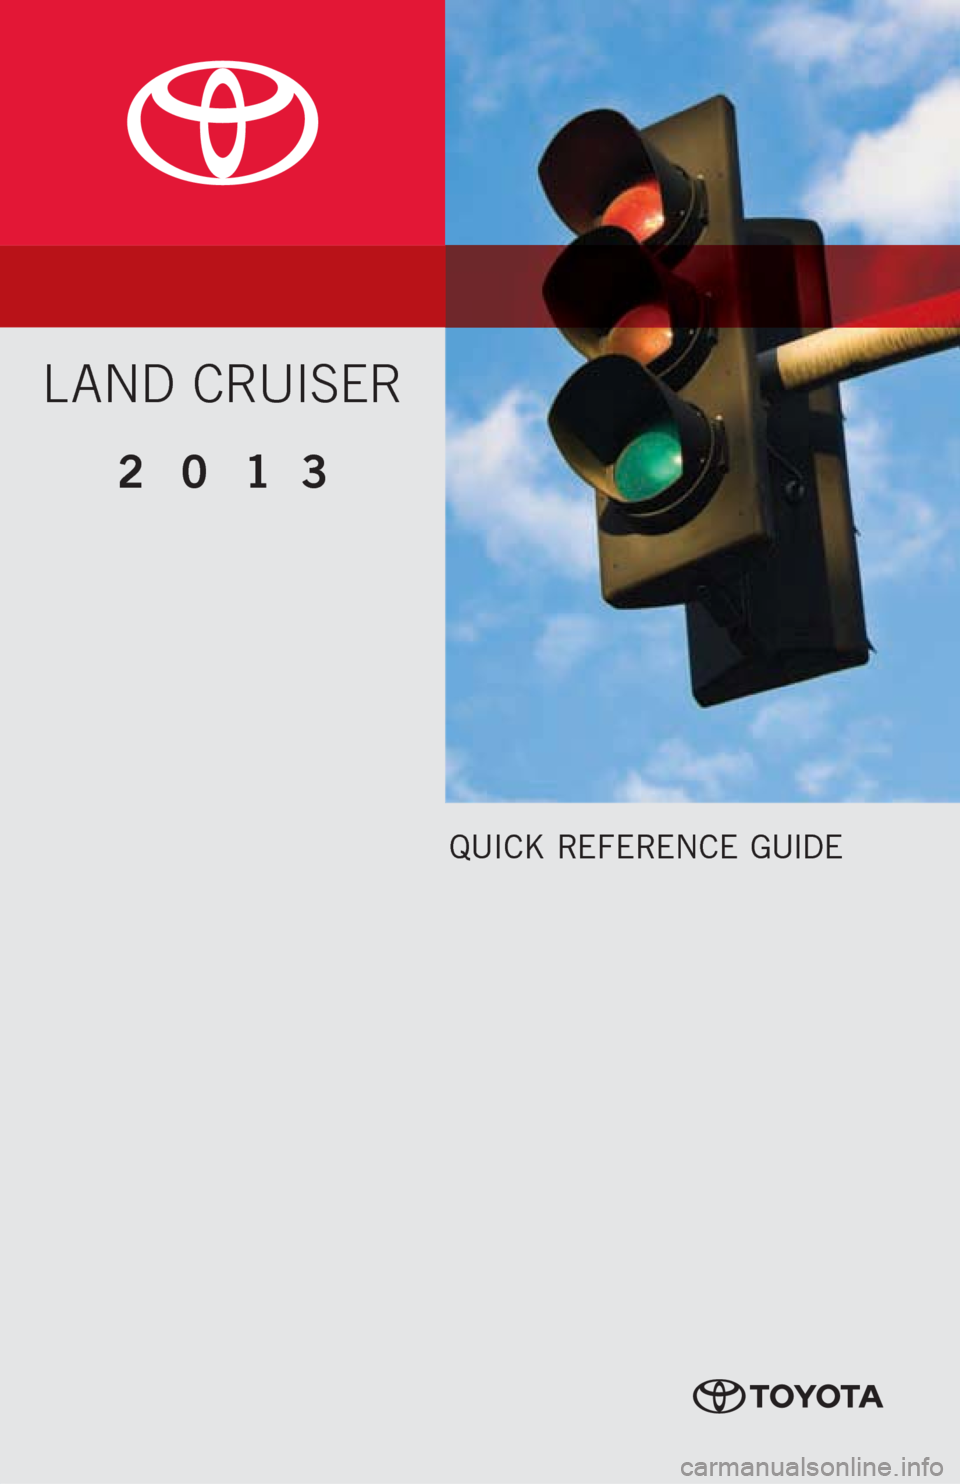 TOYOTA LAND CRUISER 2013 J200 Quick Reference Guide QUICK REFERENCE GUIDE
LAND CRUISER
2013 